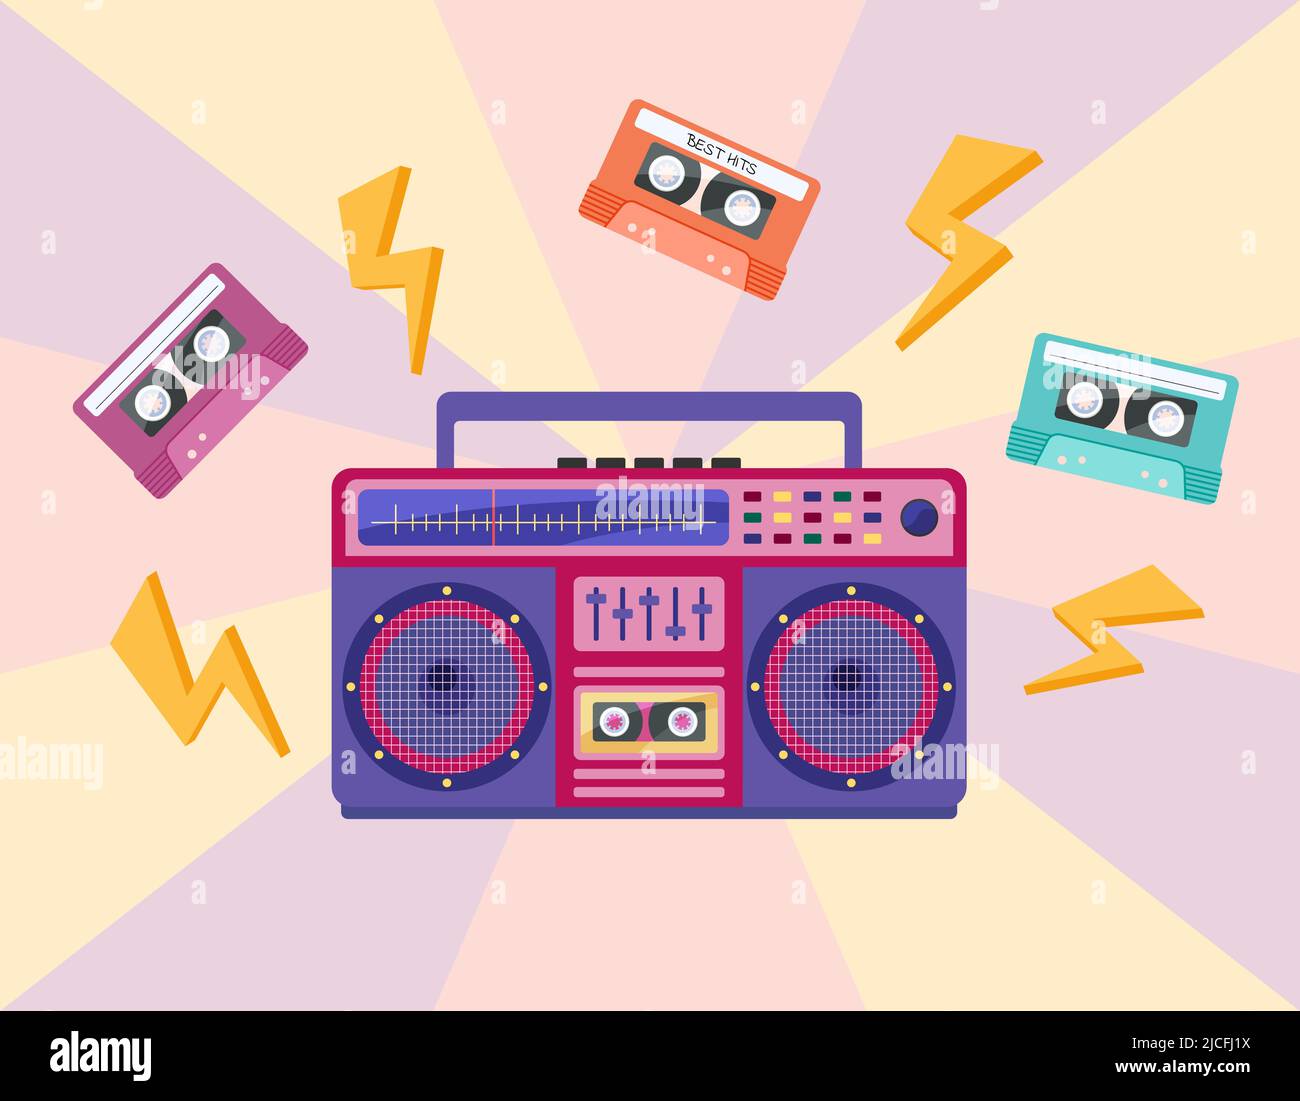 1990s music. Vibrant boombox and tapes isolated. Audio recorder retro device from 80s 90s. Flat vector illustration of colorful boombox and cassettes. Stock Vector